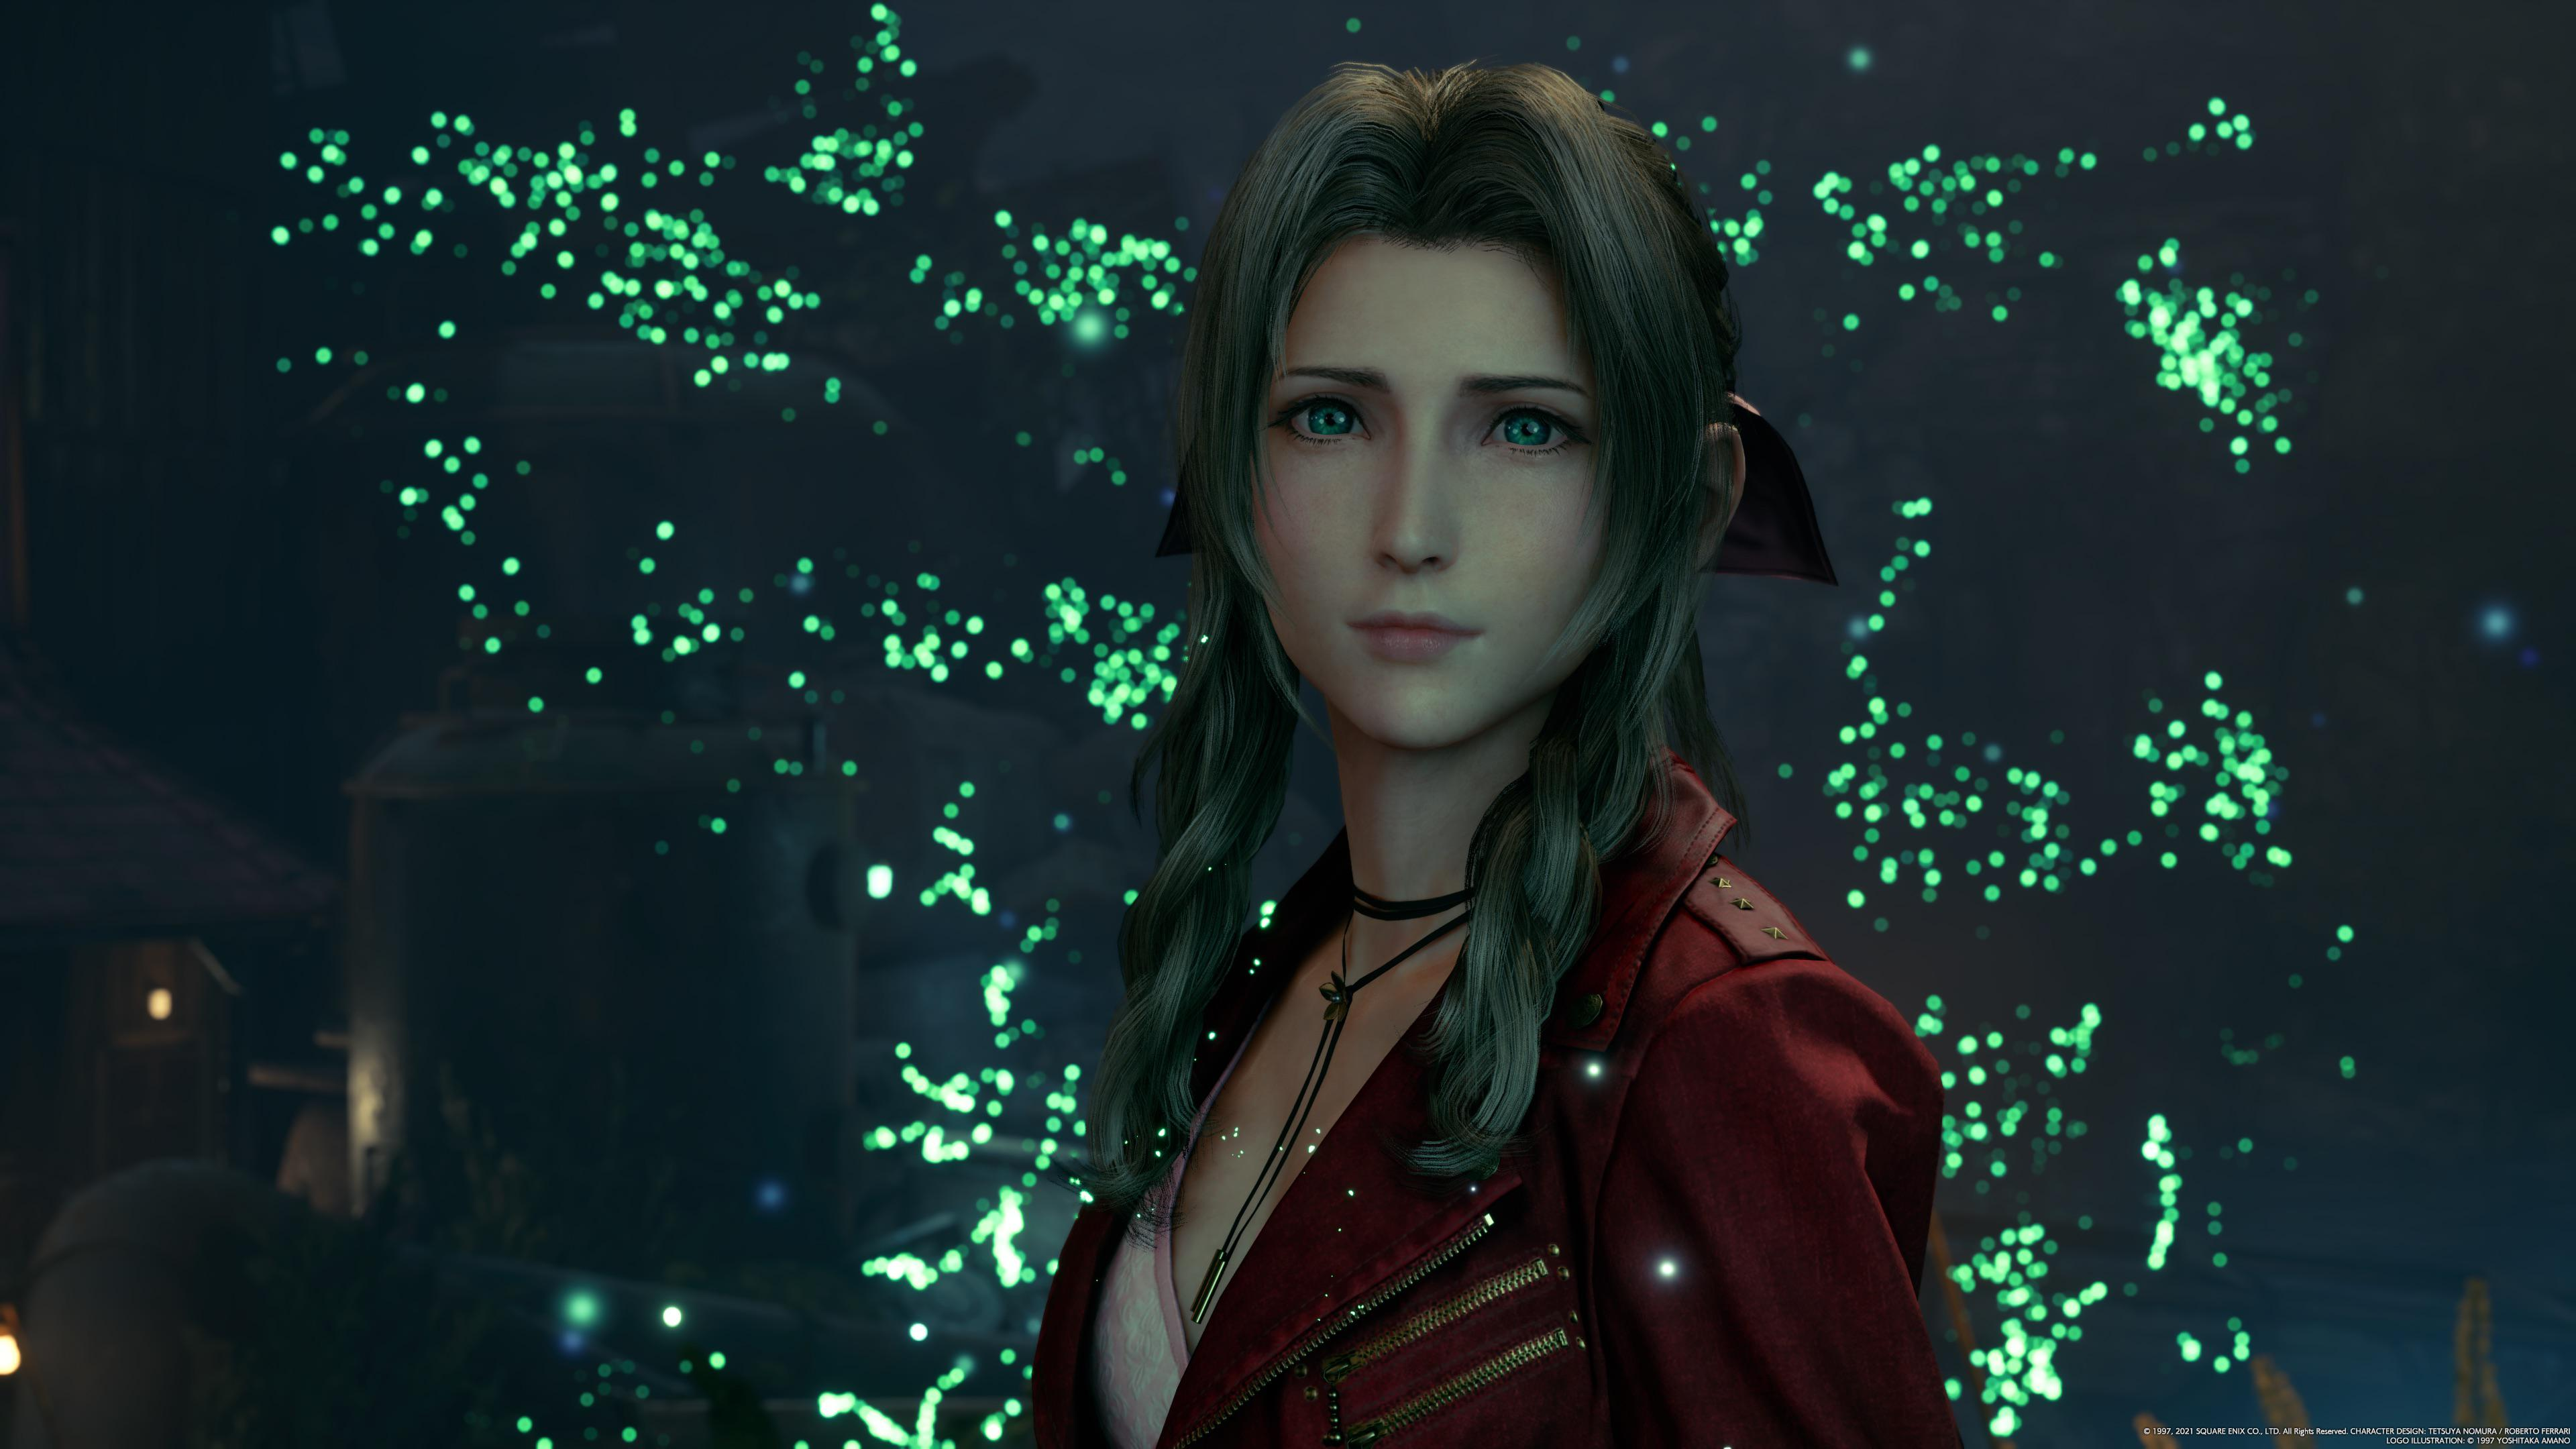 Final Fantasy 7 Remake Intergrade system requirements ask for